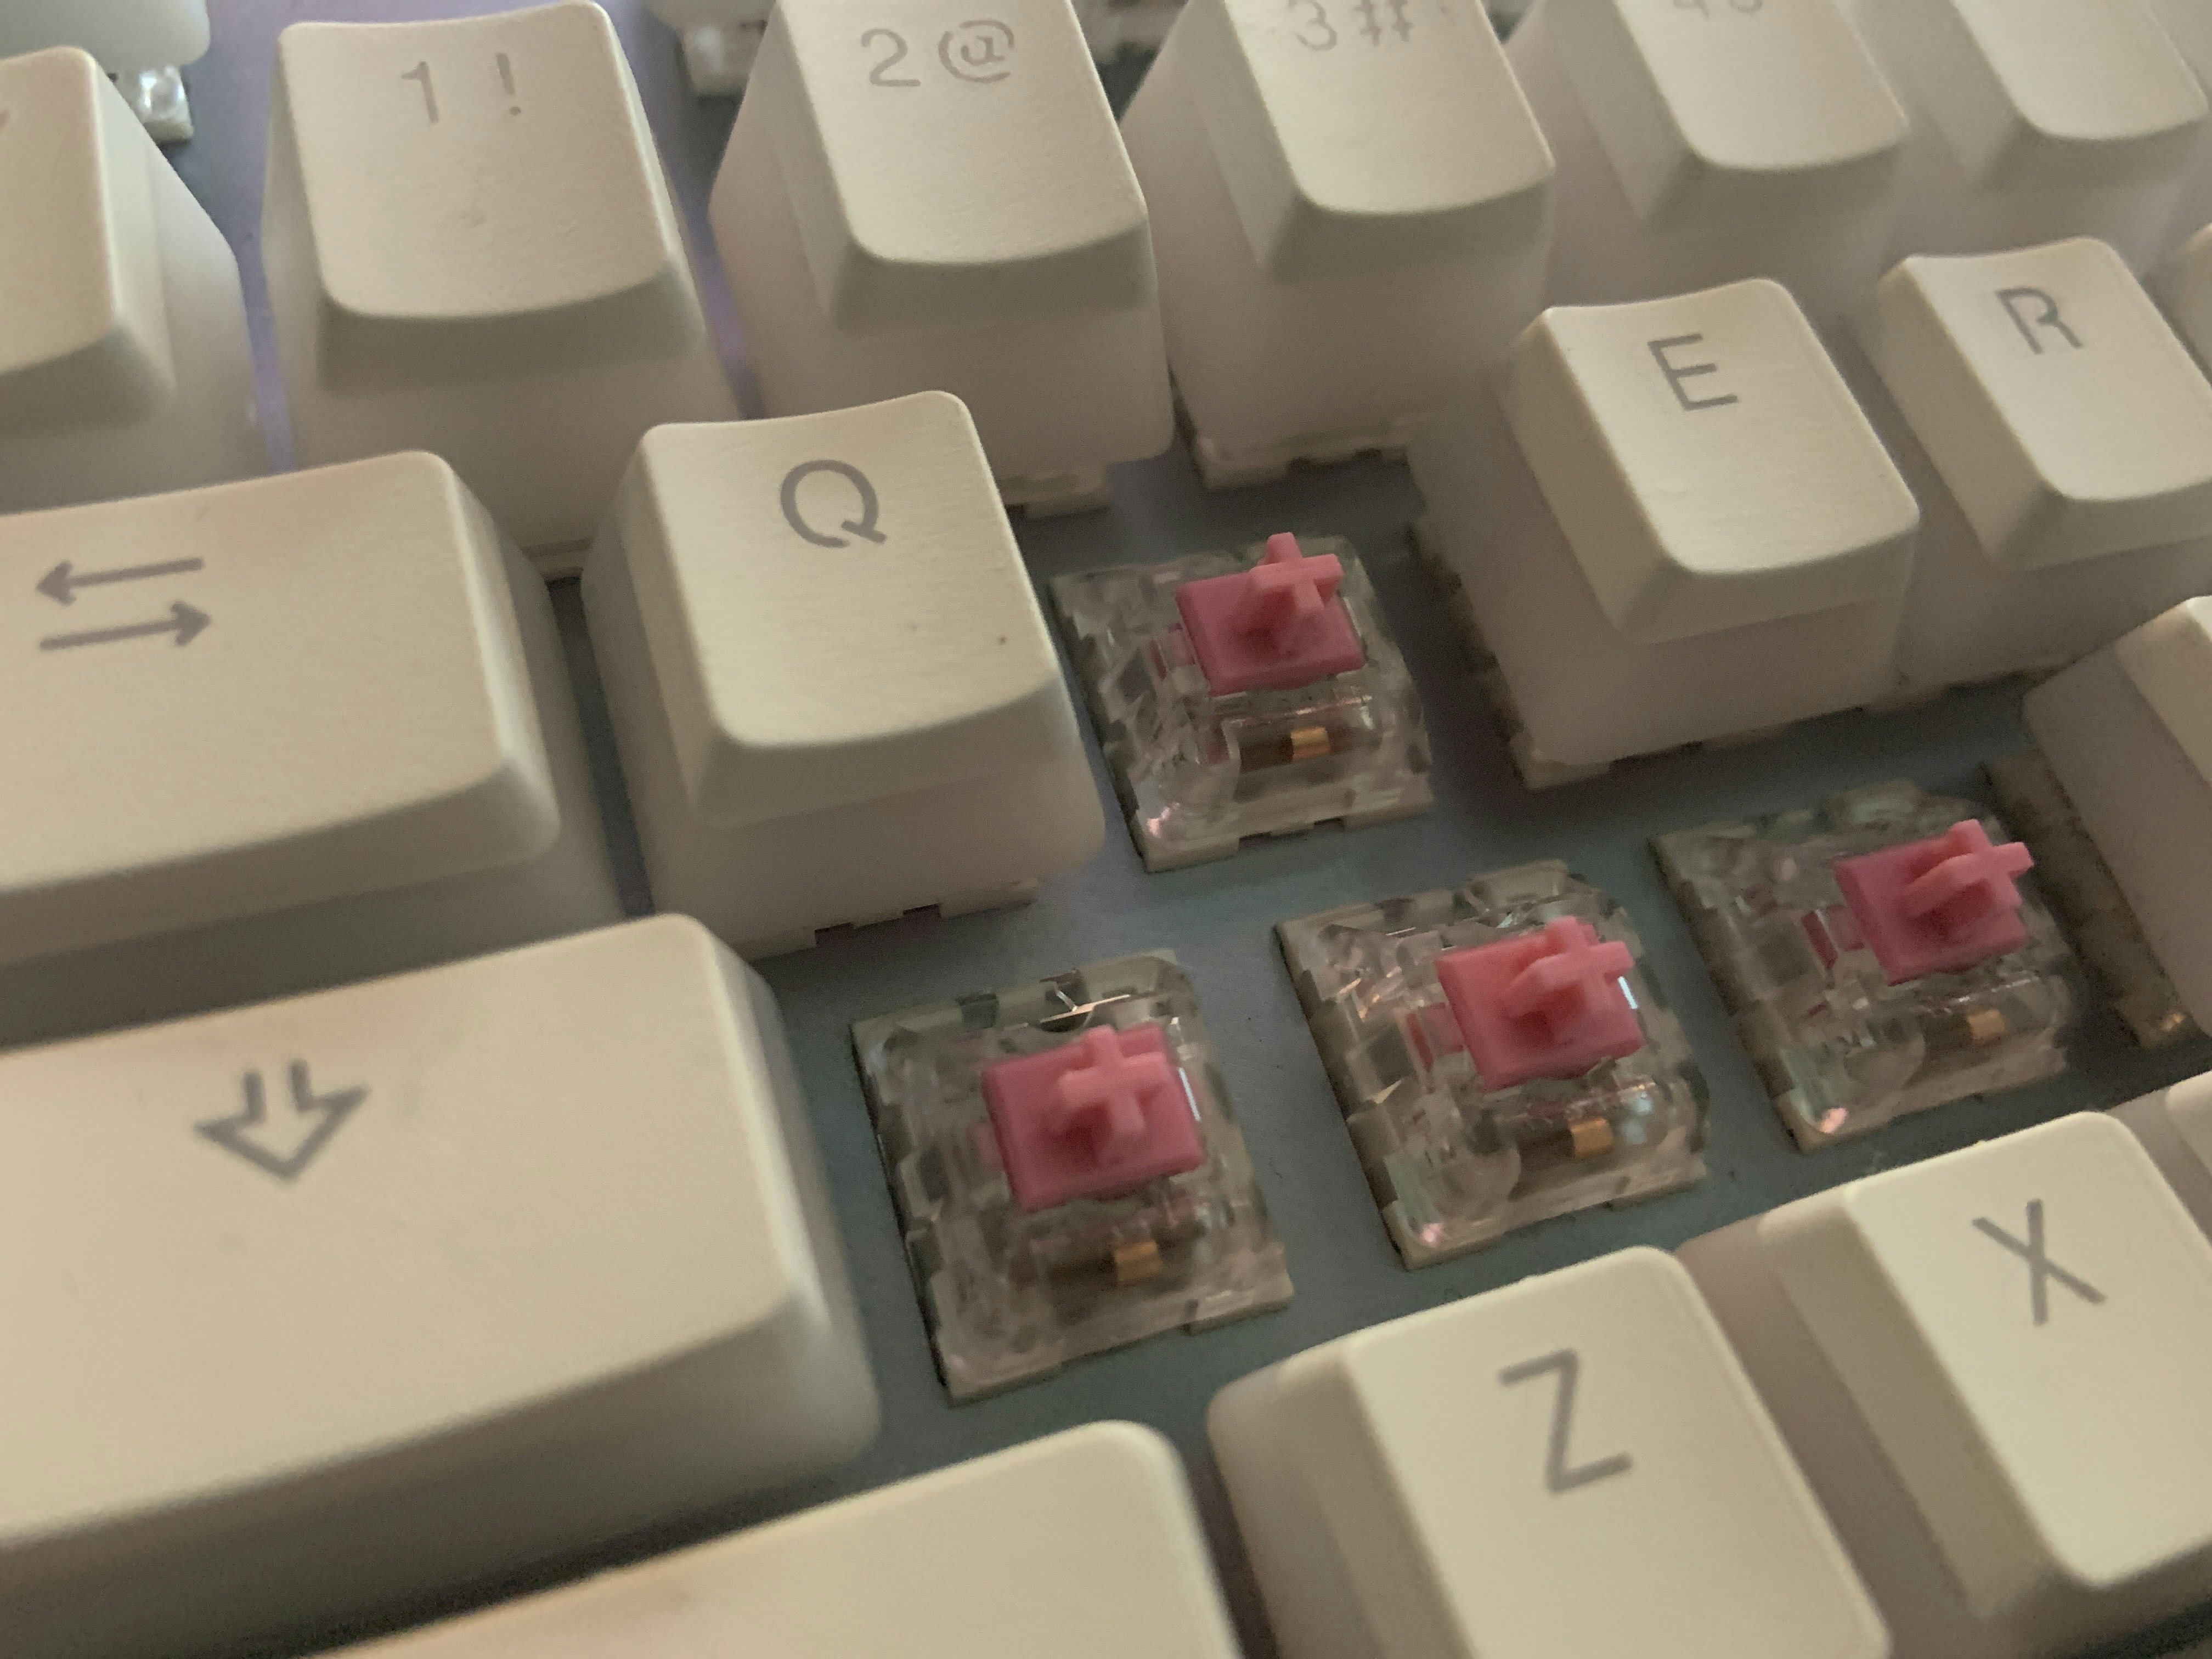 clicky vs tactile switches